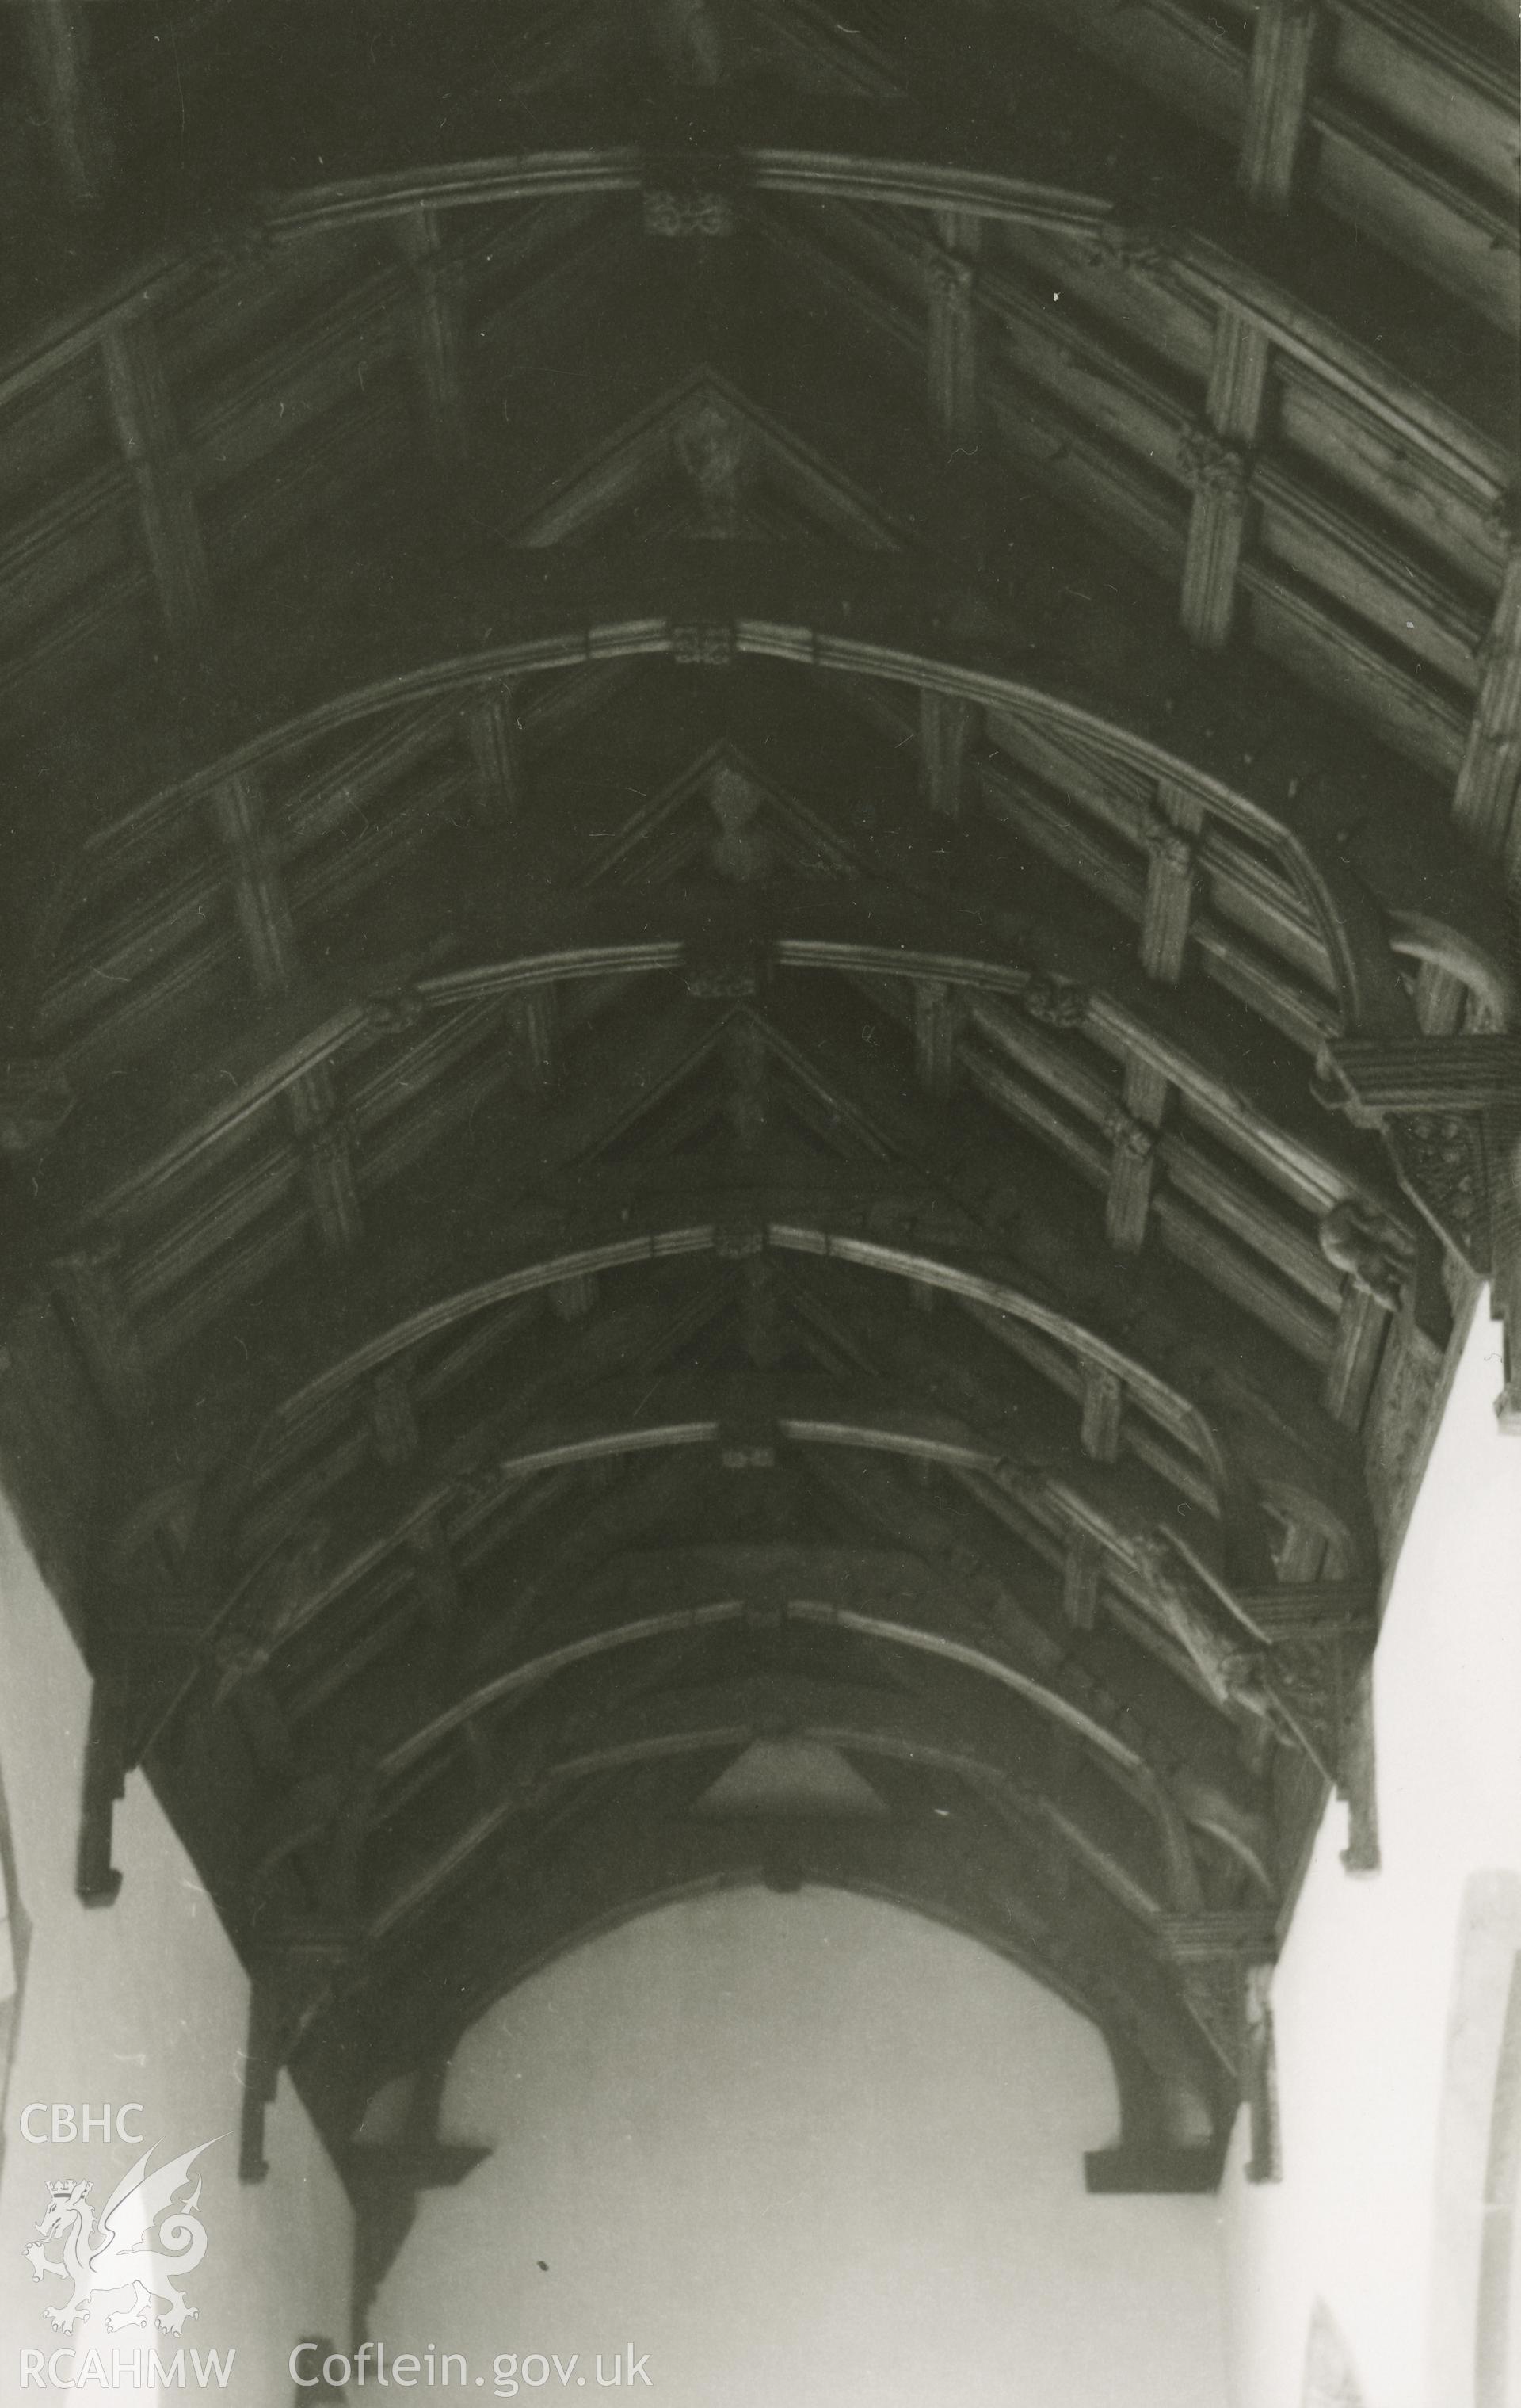 Digital copy of of a black and white photo showing the north aisle roof at St Collen's Church taken by P.G.M. Dickinson, c.1965